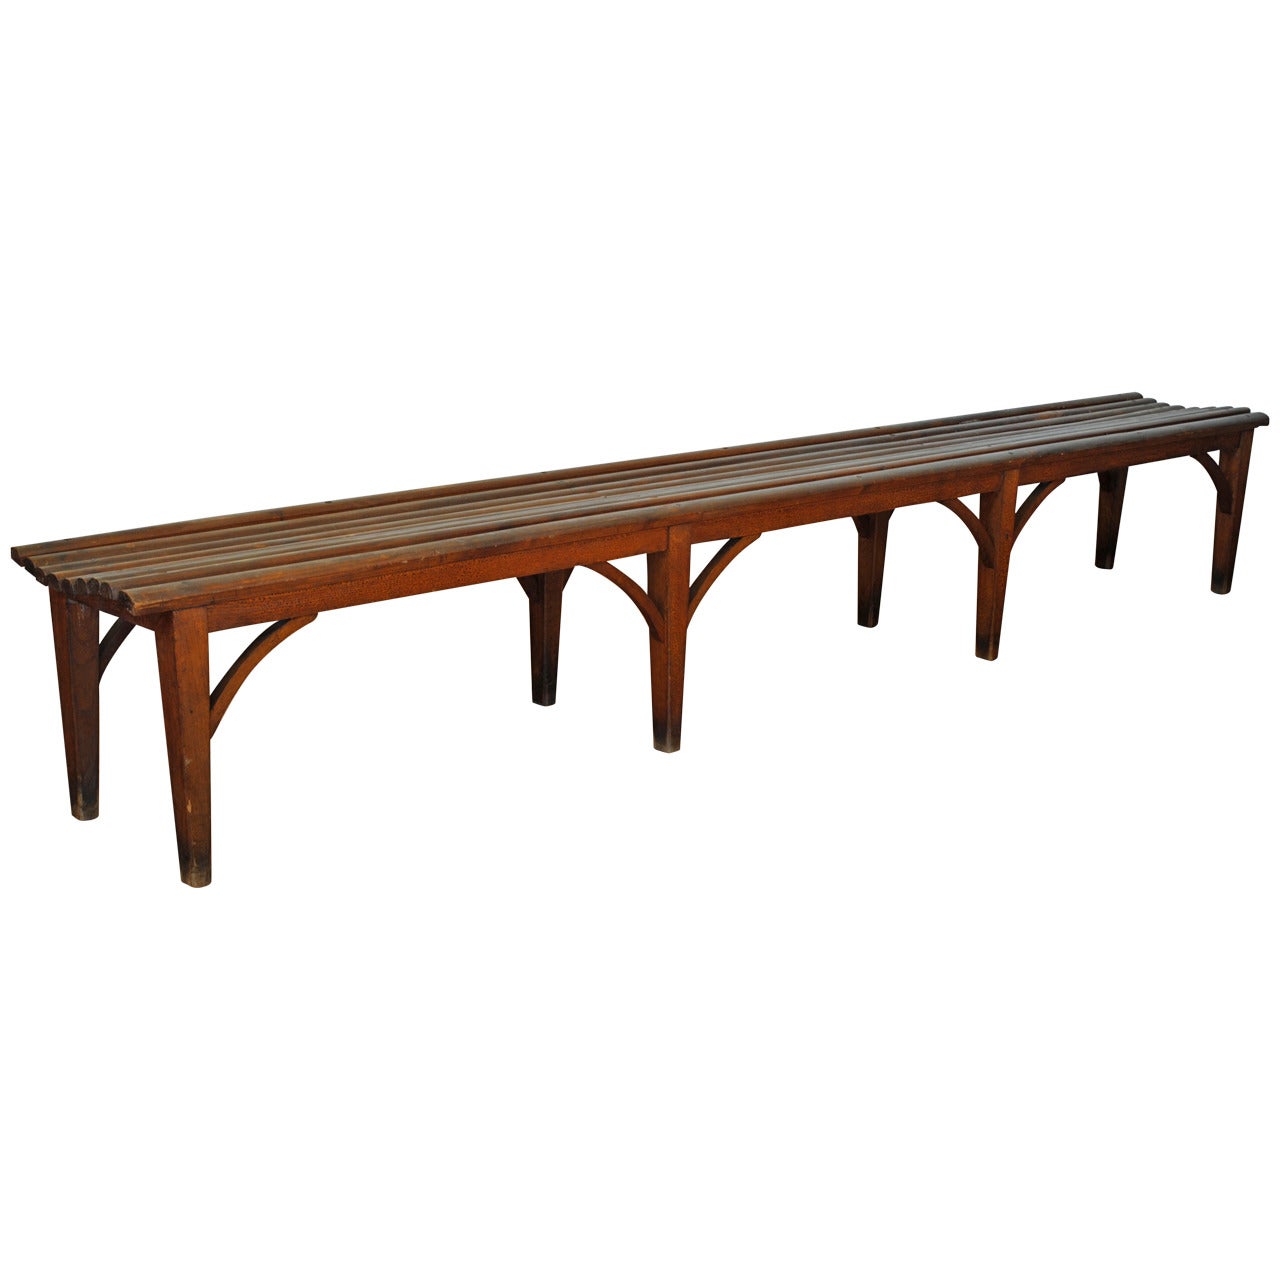 Long French Painted Wood Bench, Mid- to Late 19th Century